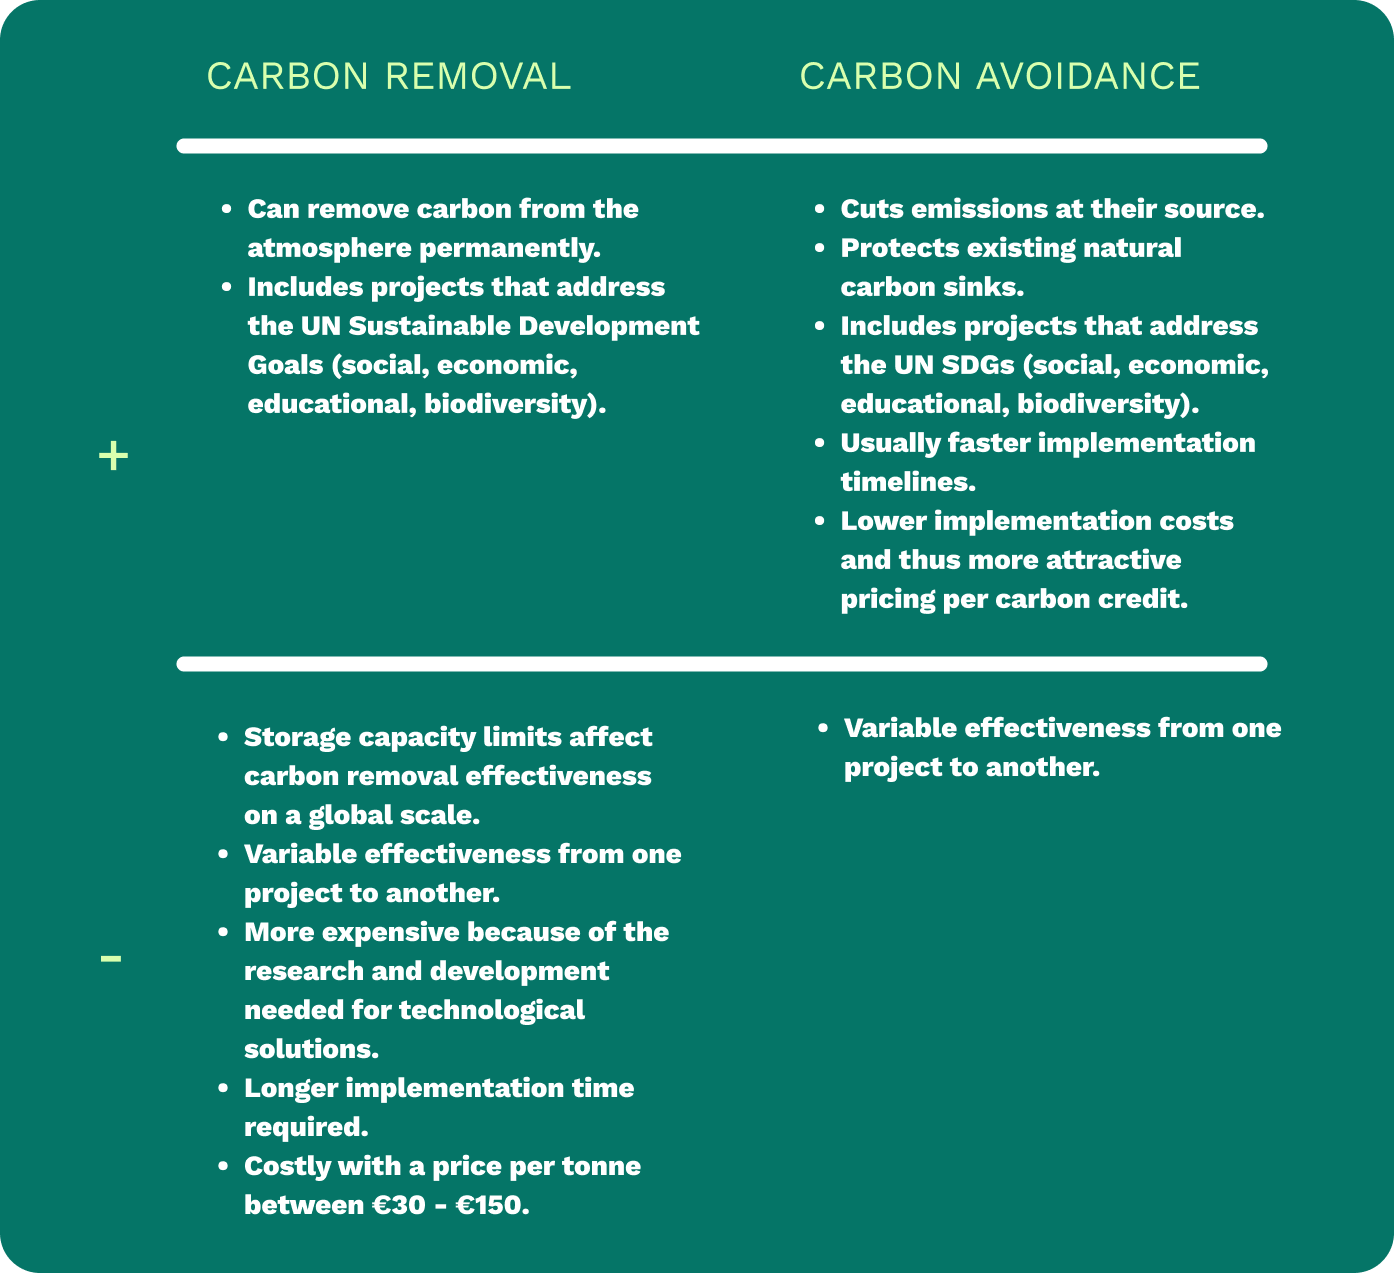 Carbon removal and carbon avoidance pros and cons